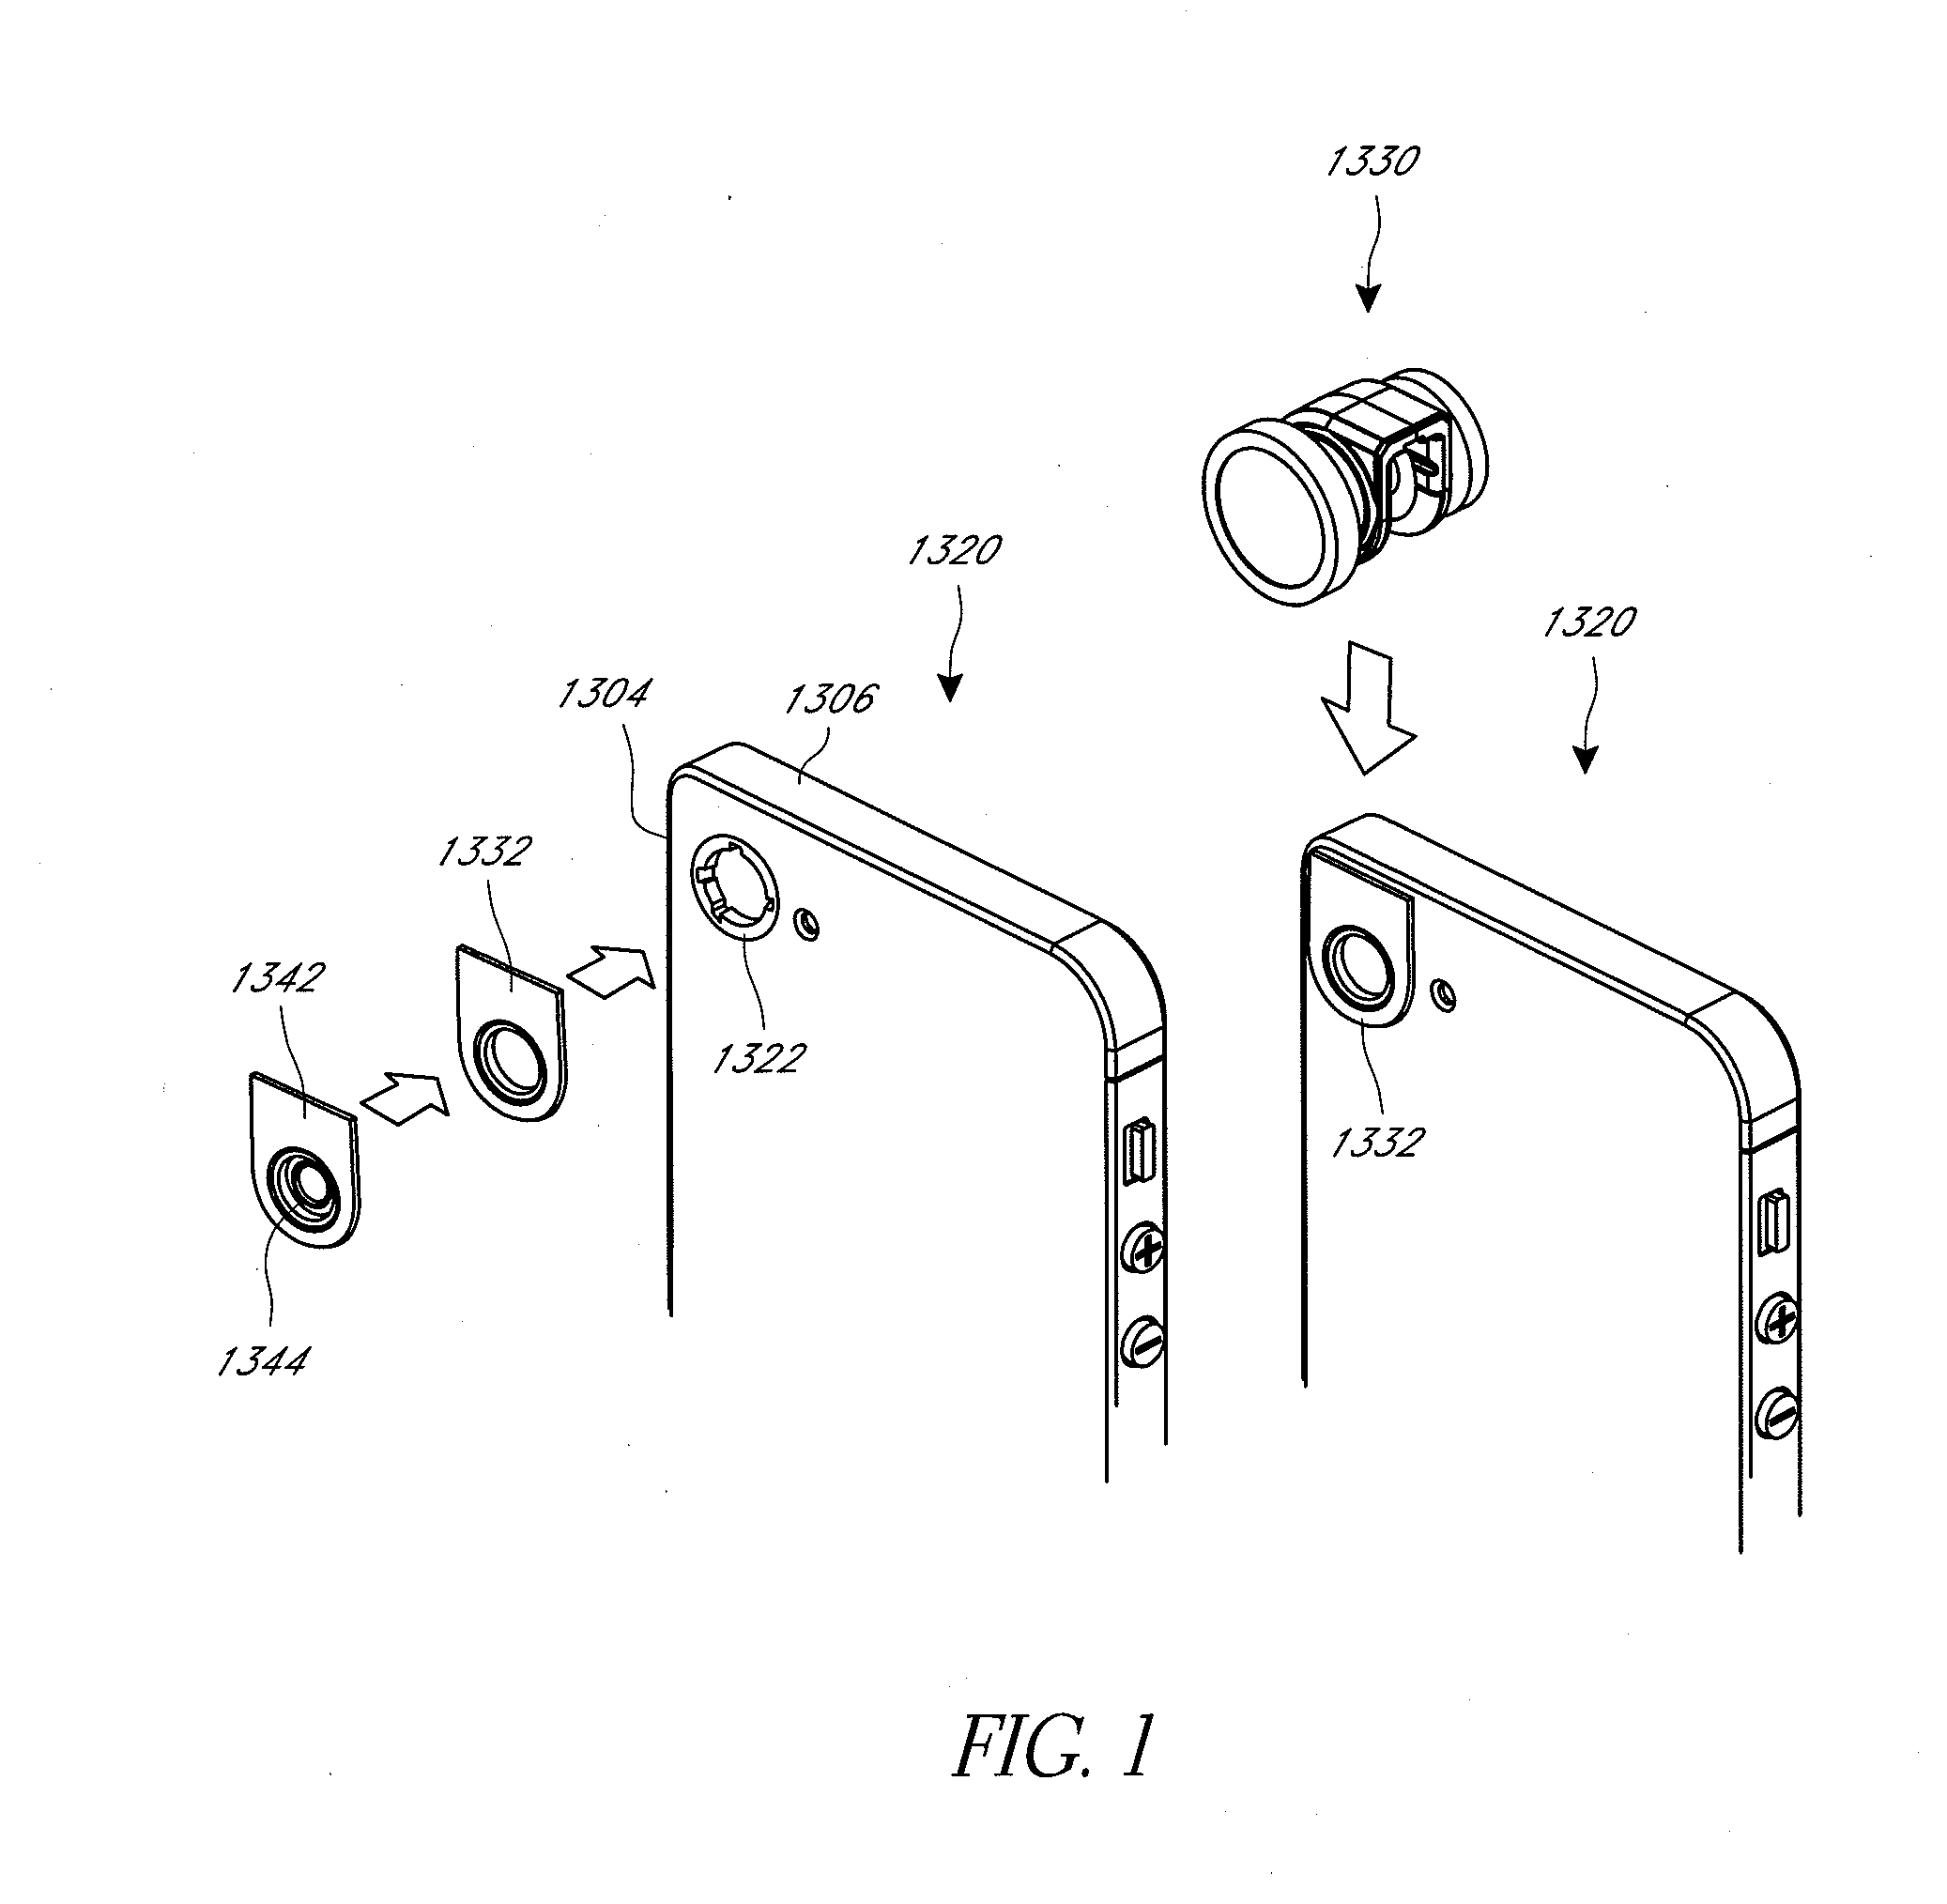 Auxiliary optical components for mobile devices